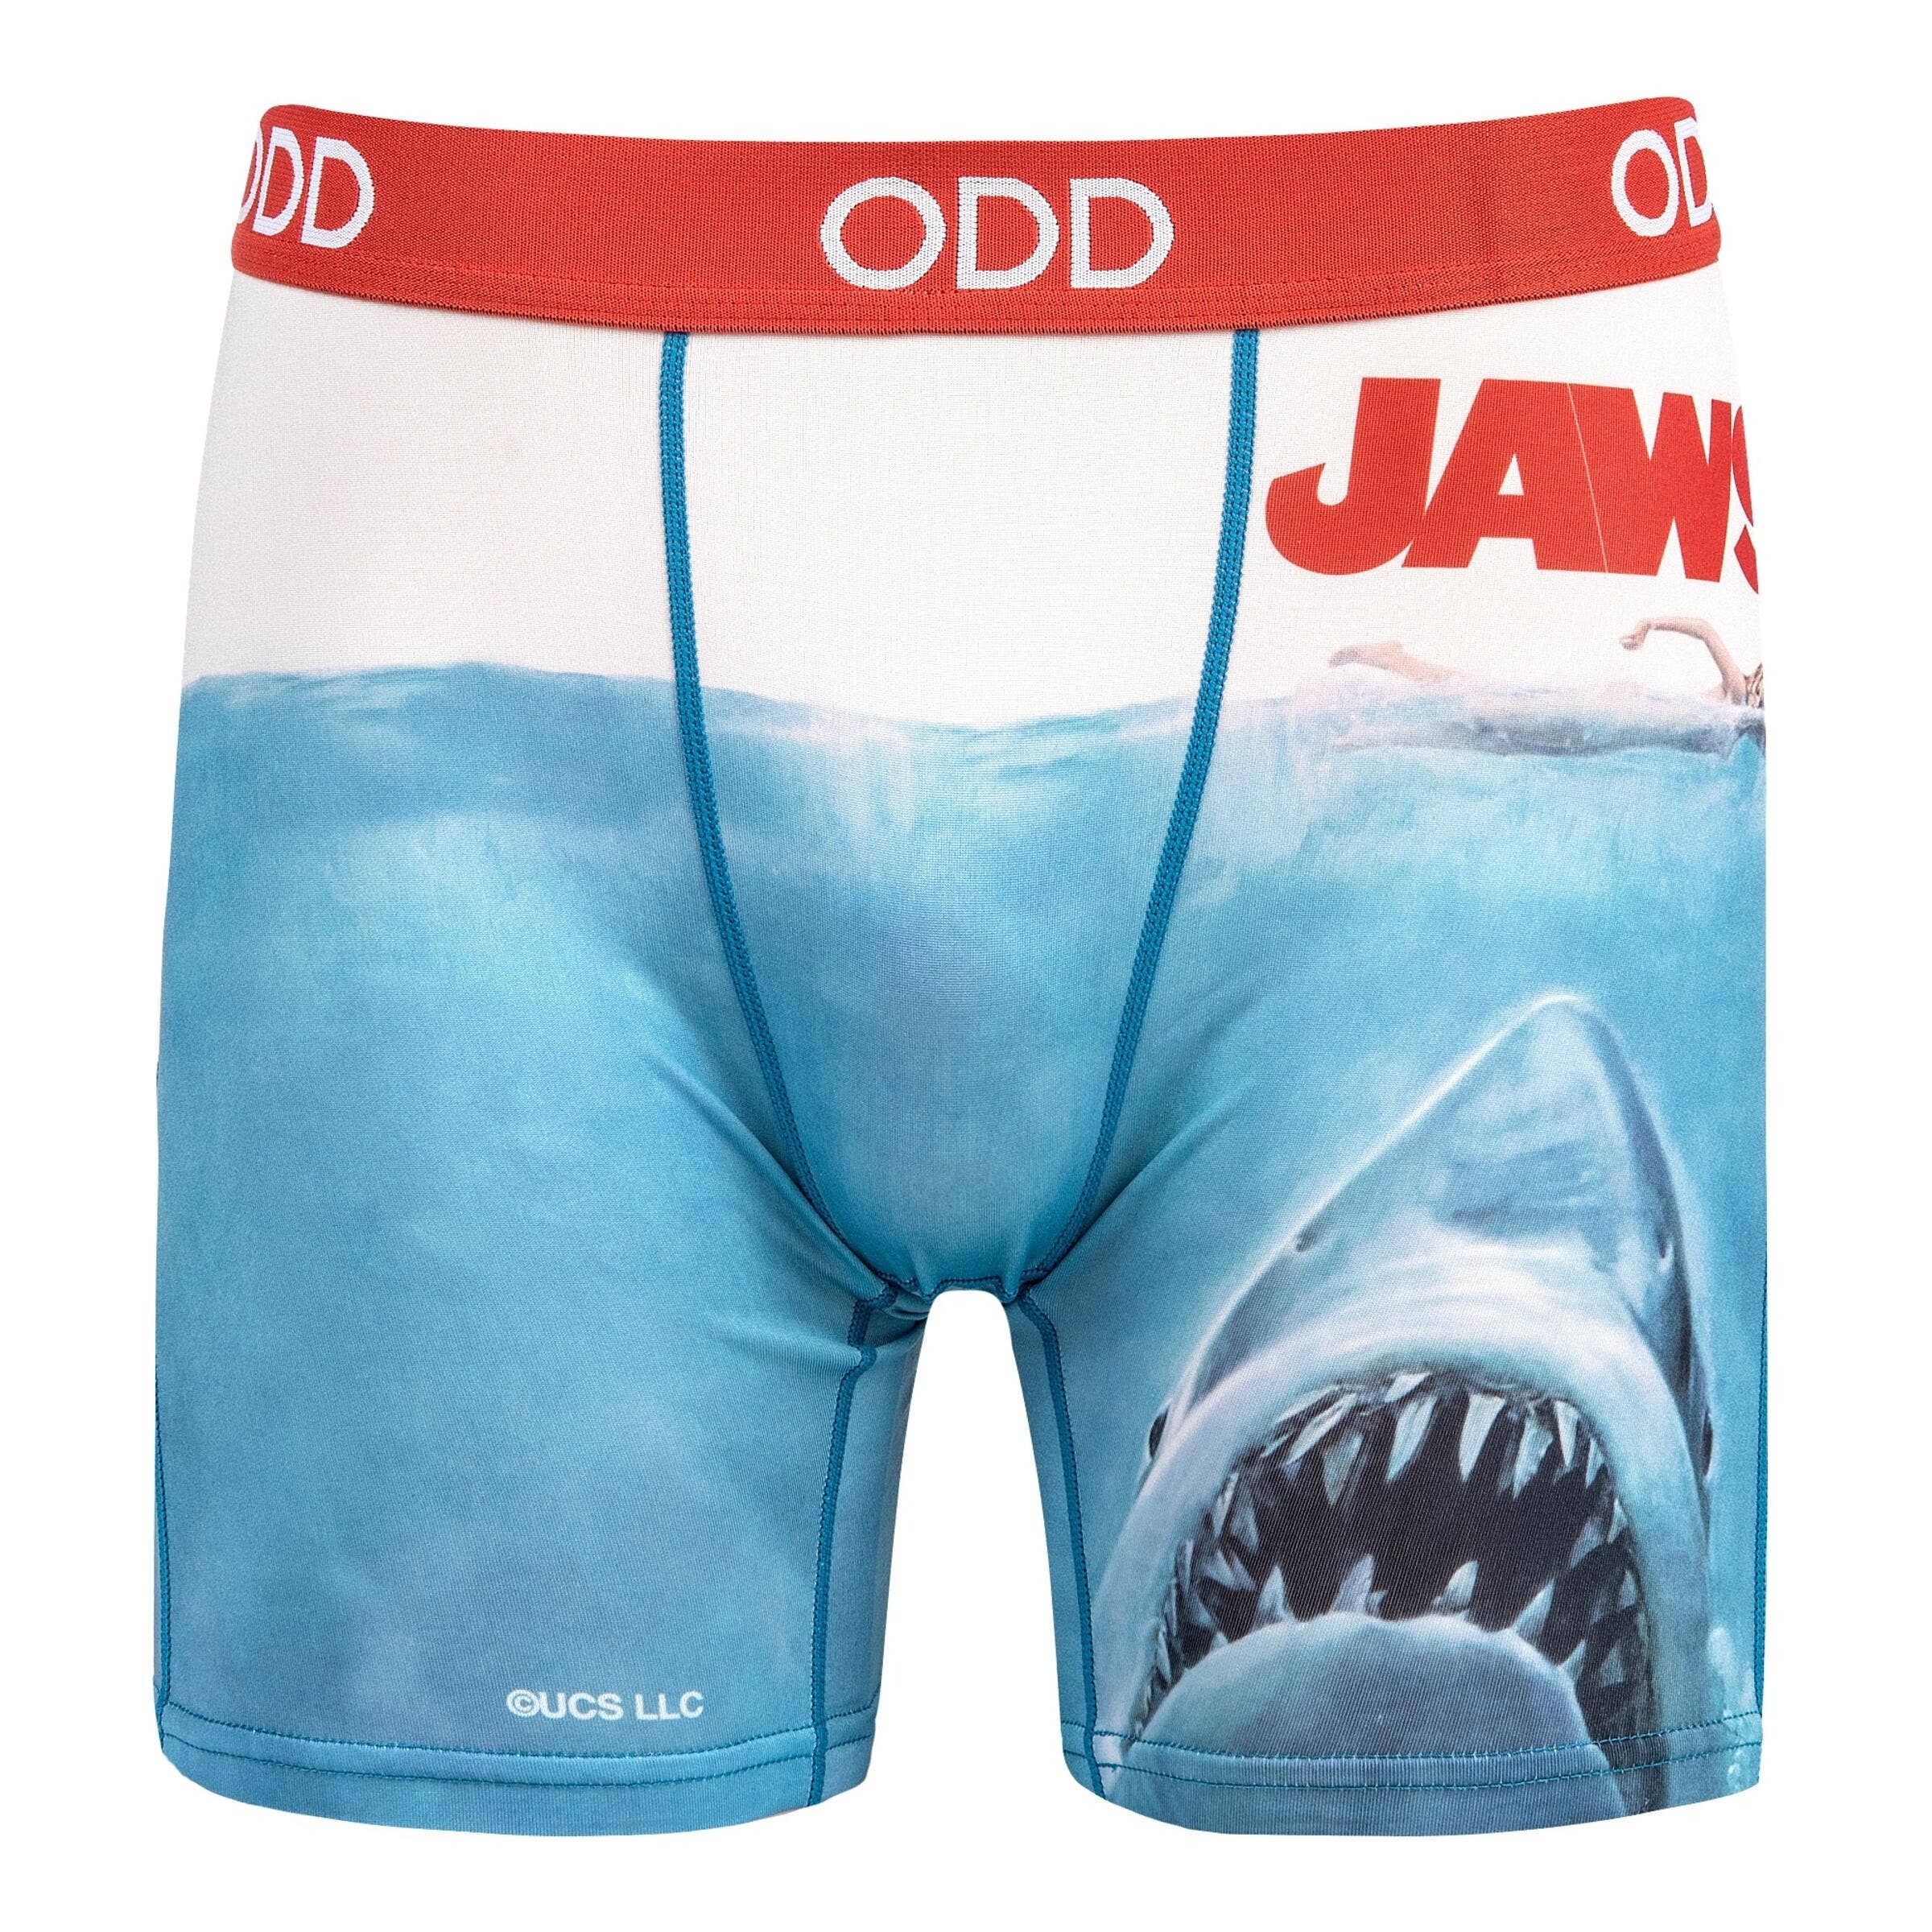 Jaws Cotton Crew Socks by ODD Sox – Great Sox